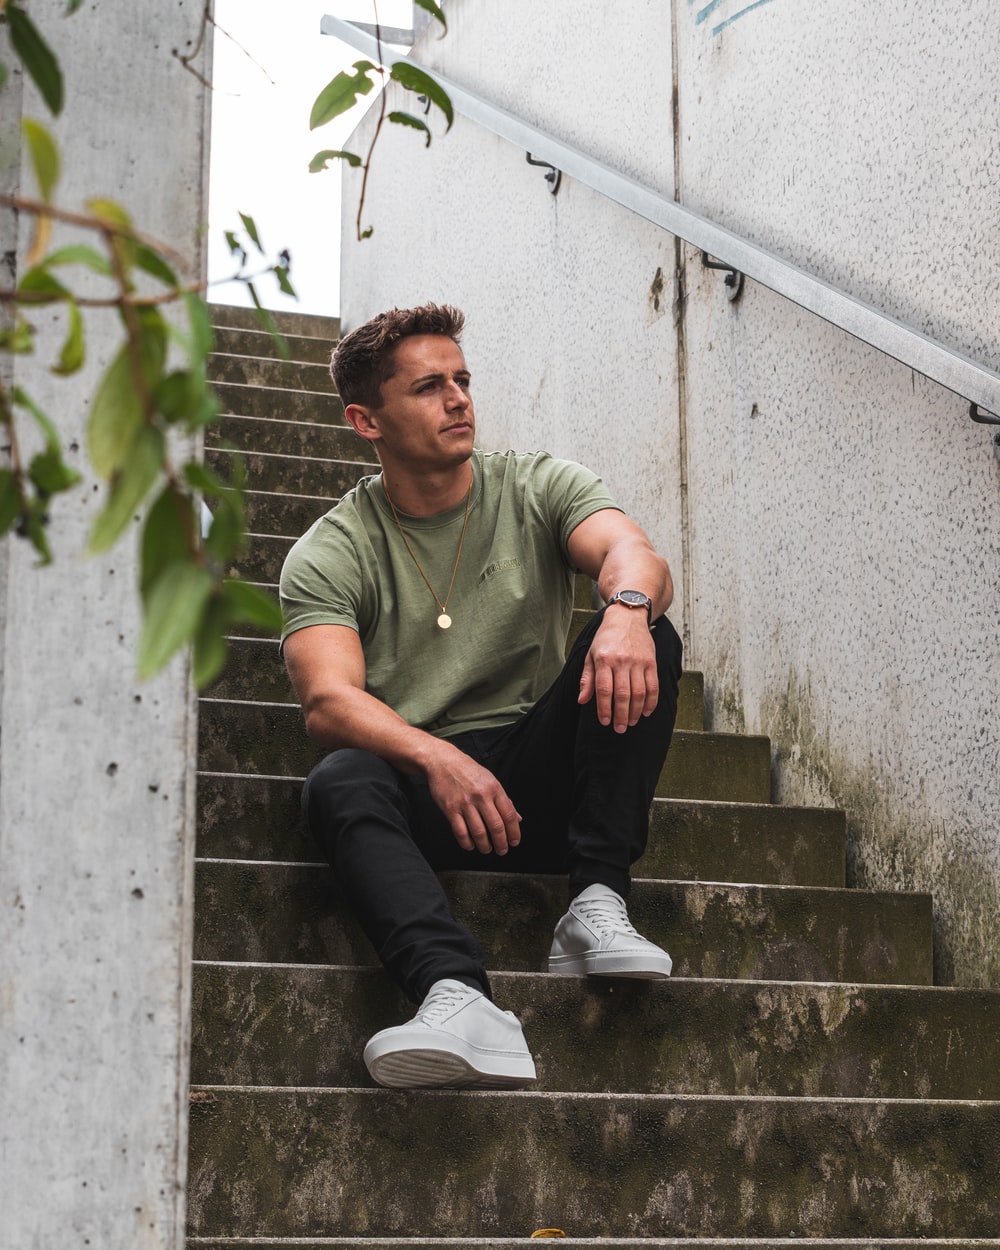 menswear man in green polo shirt and black pants sitting on gray concrete stairs